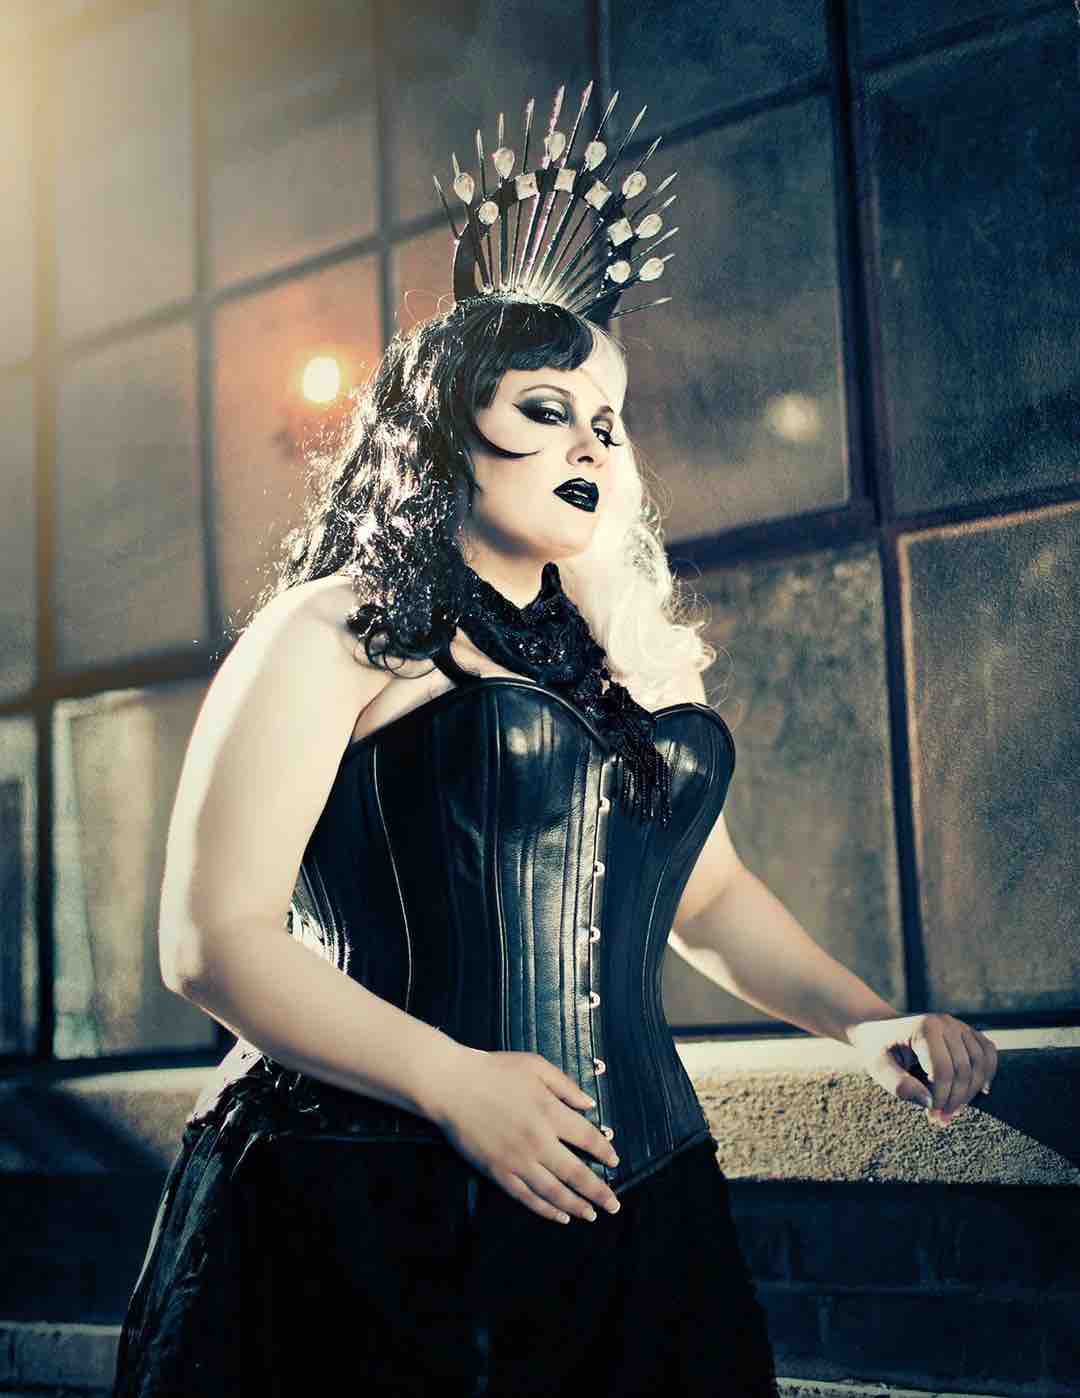 A plus size model with a spiked headdress wearing the Black Leather Short Overbust Corset -Slim over a black skirt.